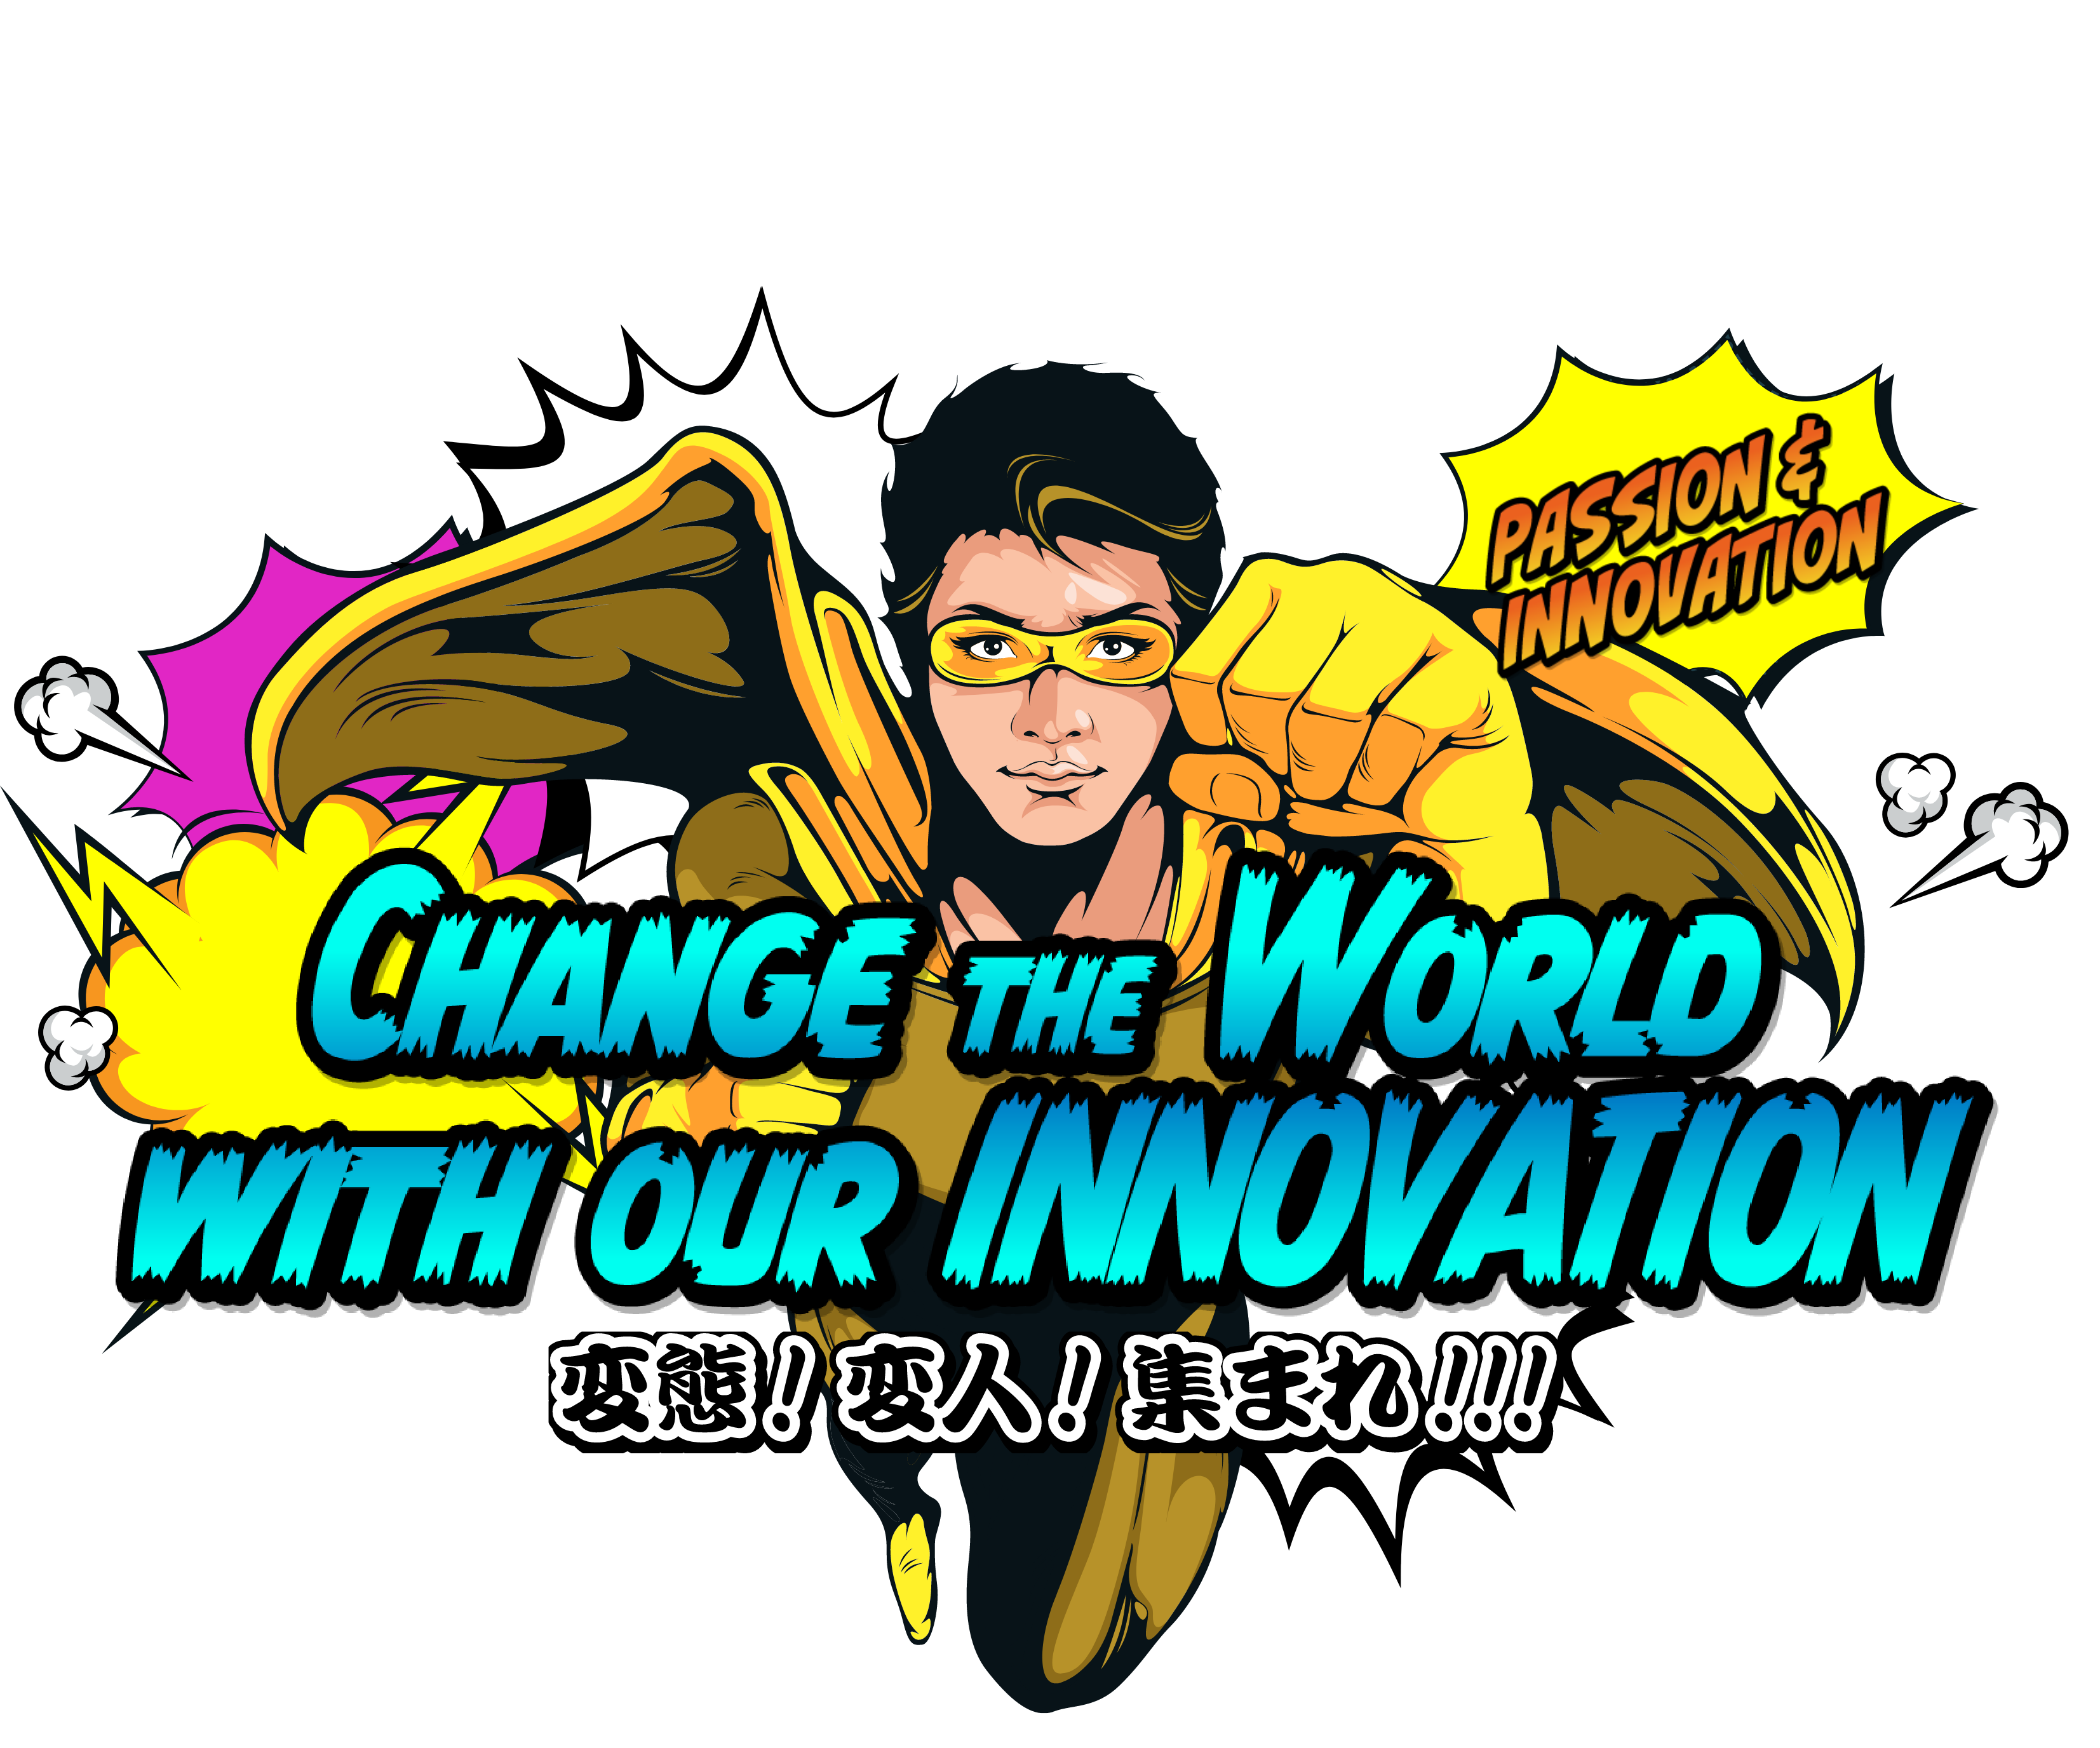 CHANGE THE WORLD WITH OUR INNOVATION 変態！変人！集まれ！！！